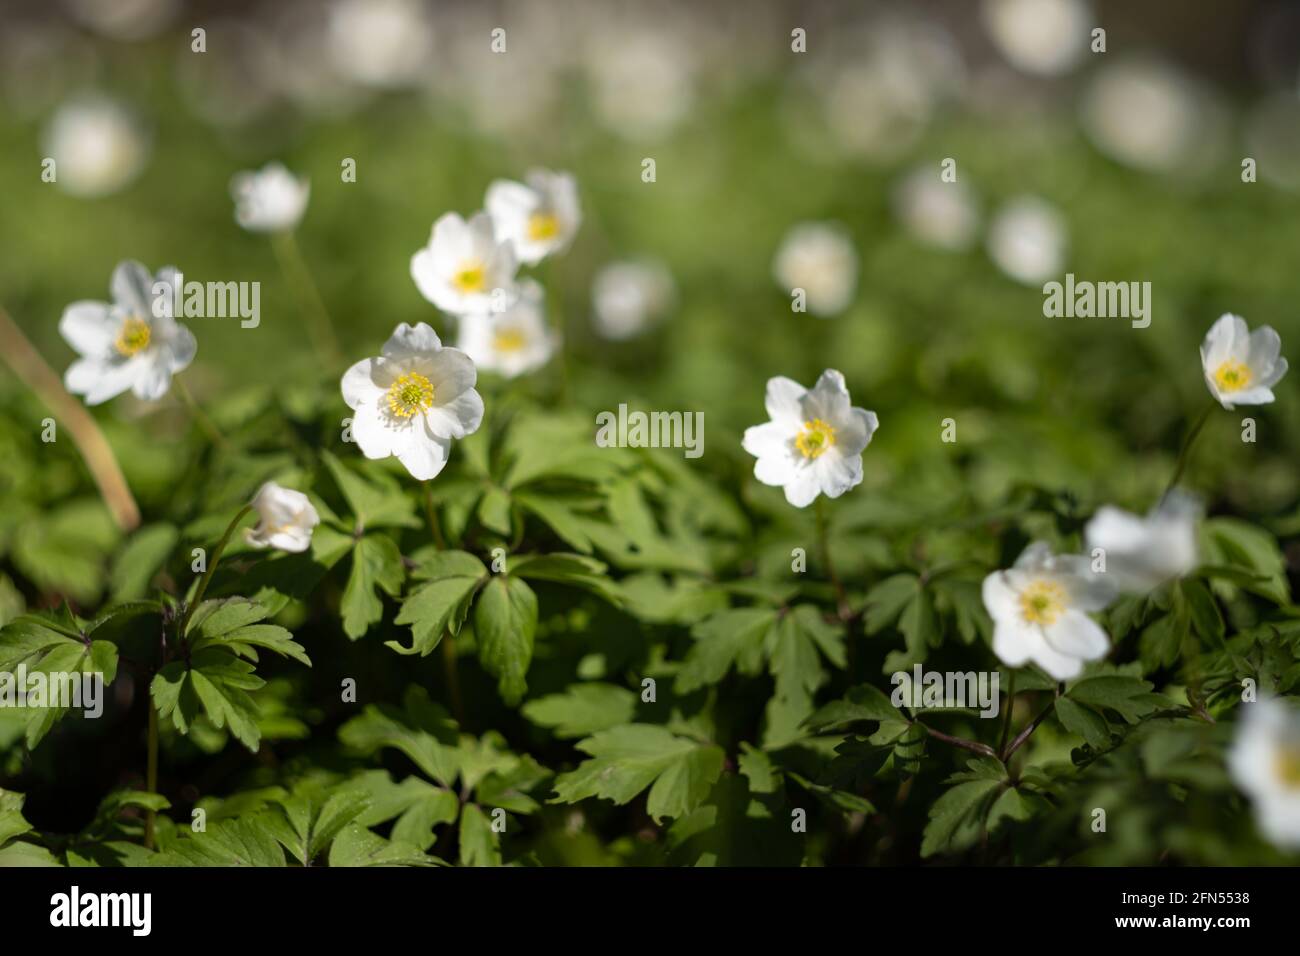 Close up of early spring wild anemone flowers Stock Photo